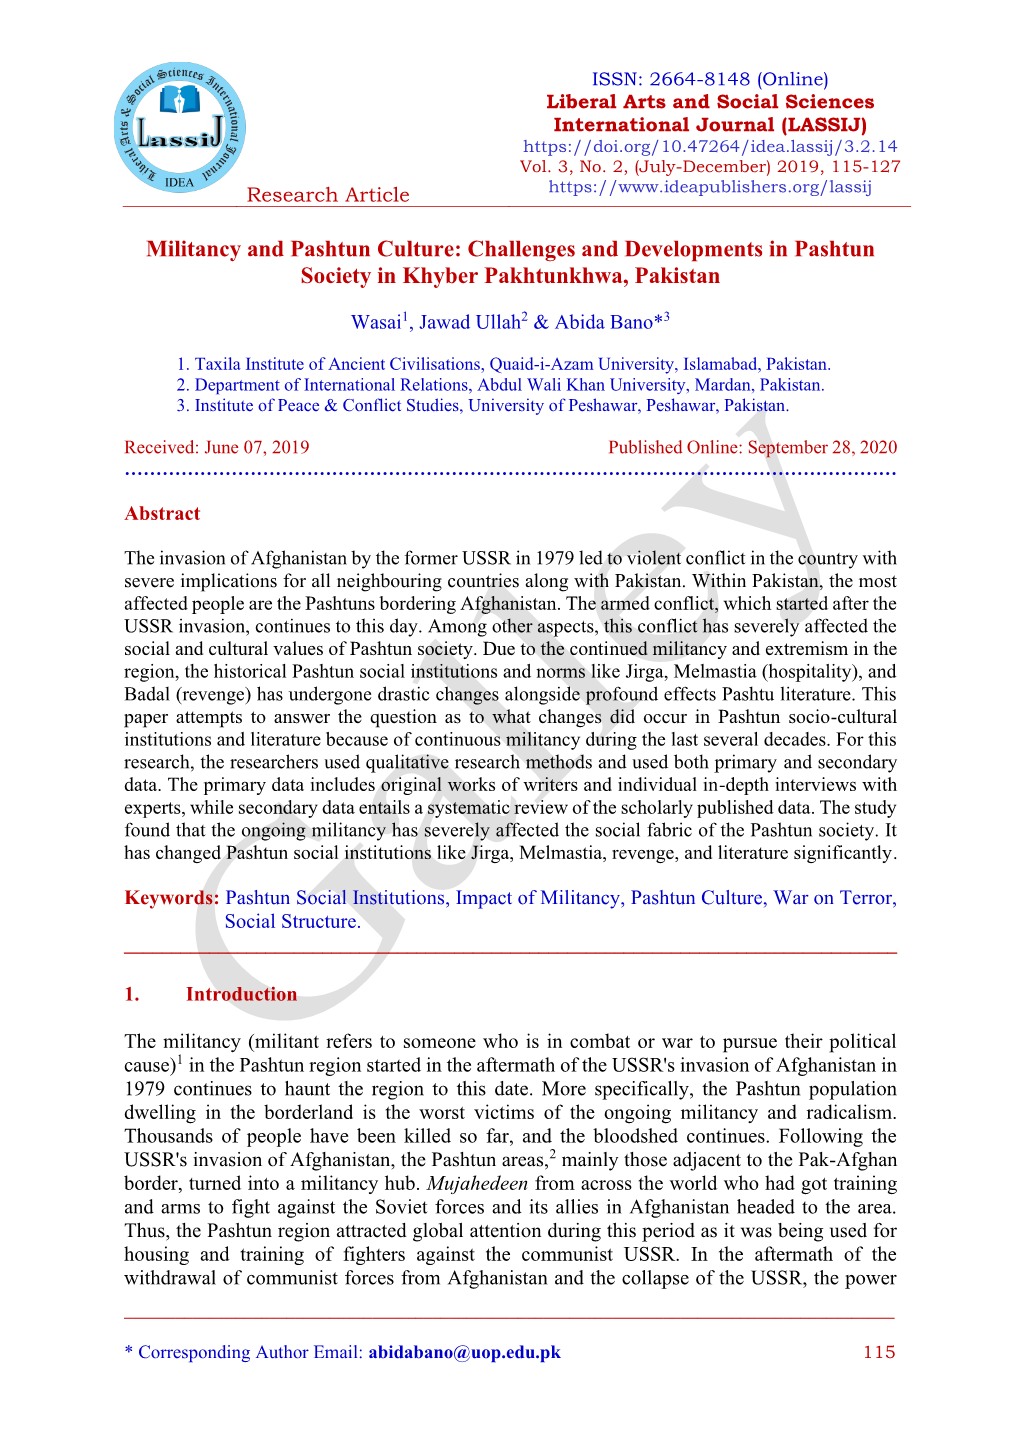 Militancy and the Social Structure Development in Pashtun Culture